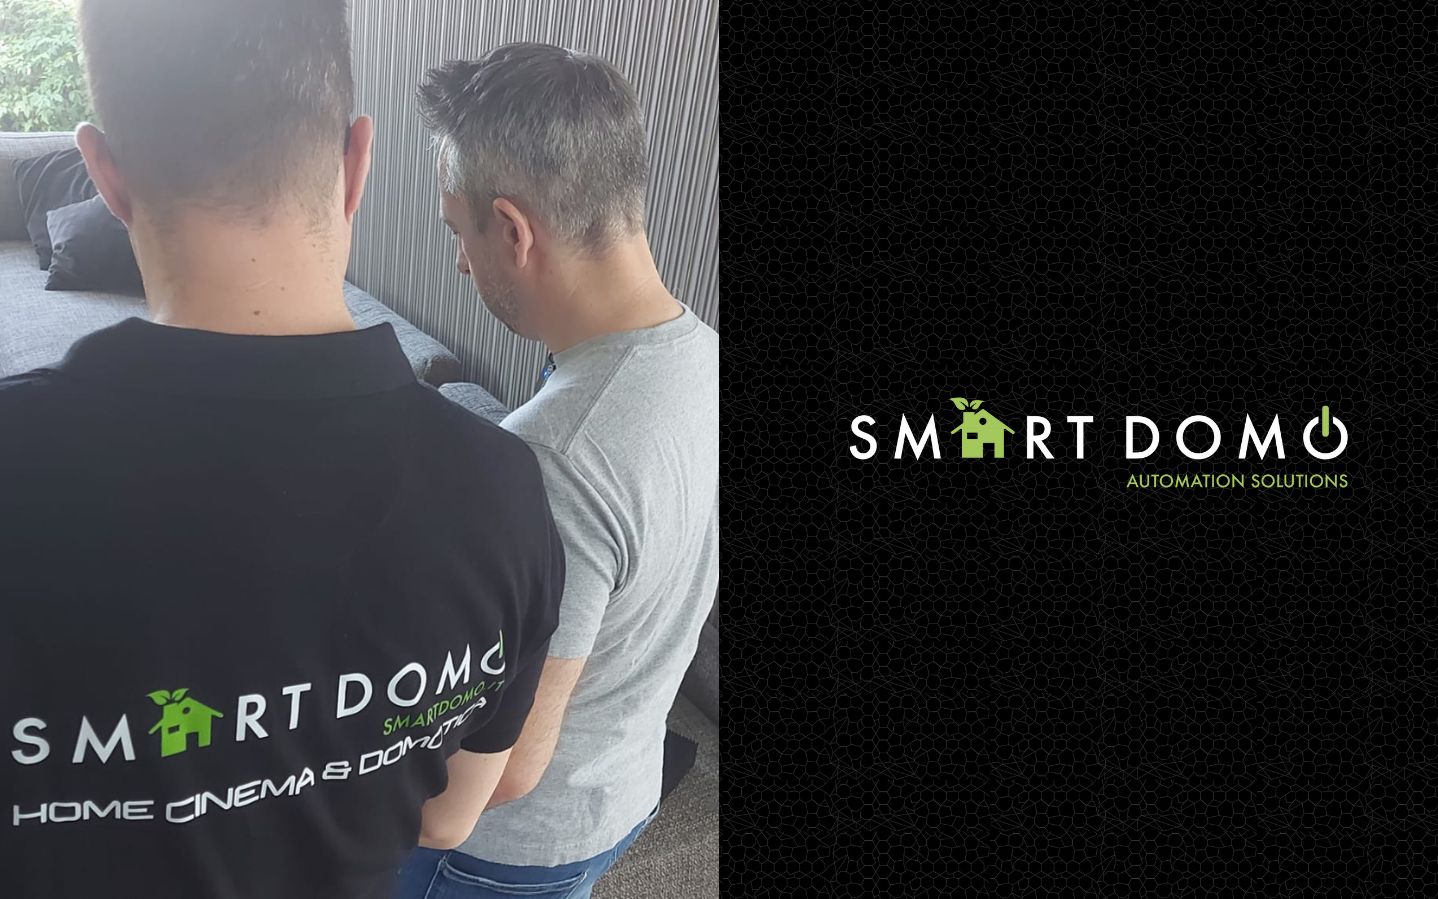 SMART DOMO | Automation Solutions